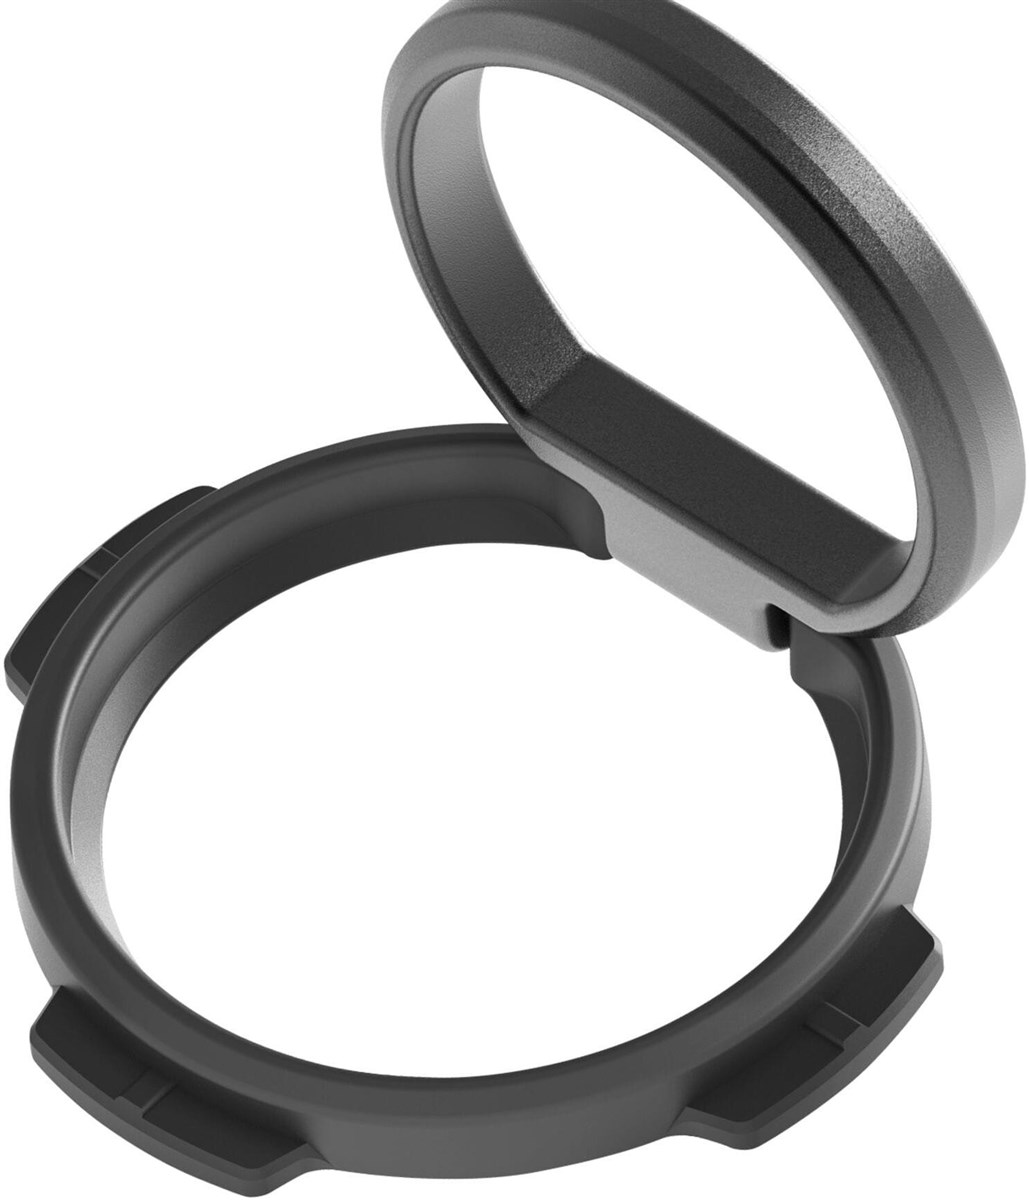 Quad Lock Phone Ring / Stand product image